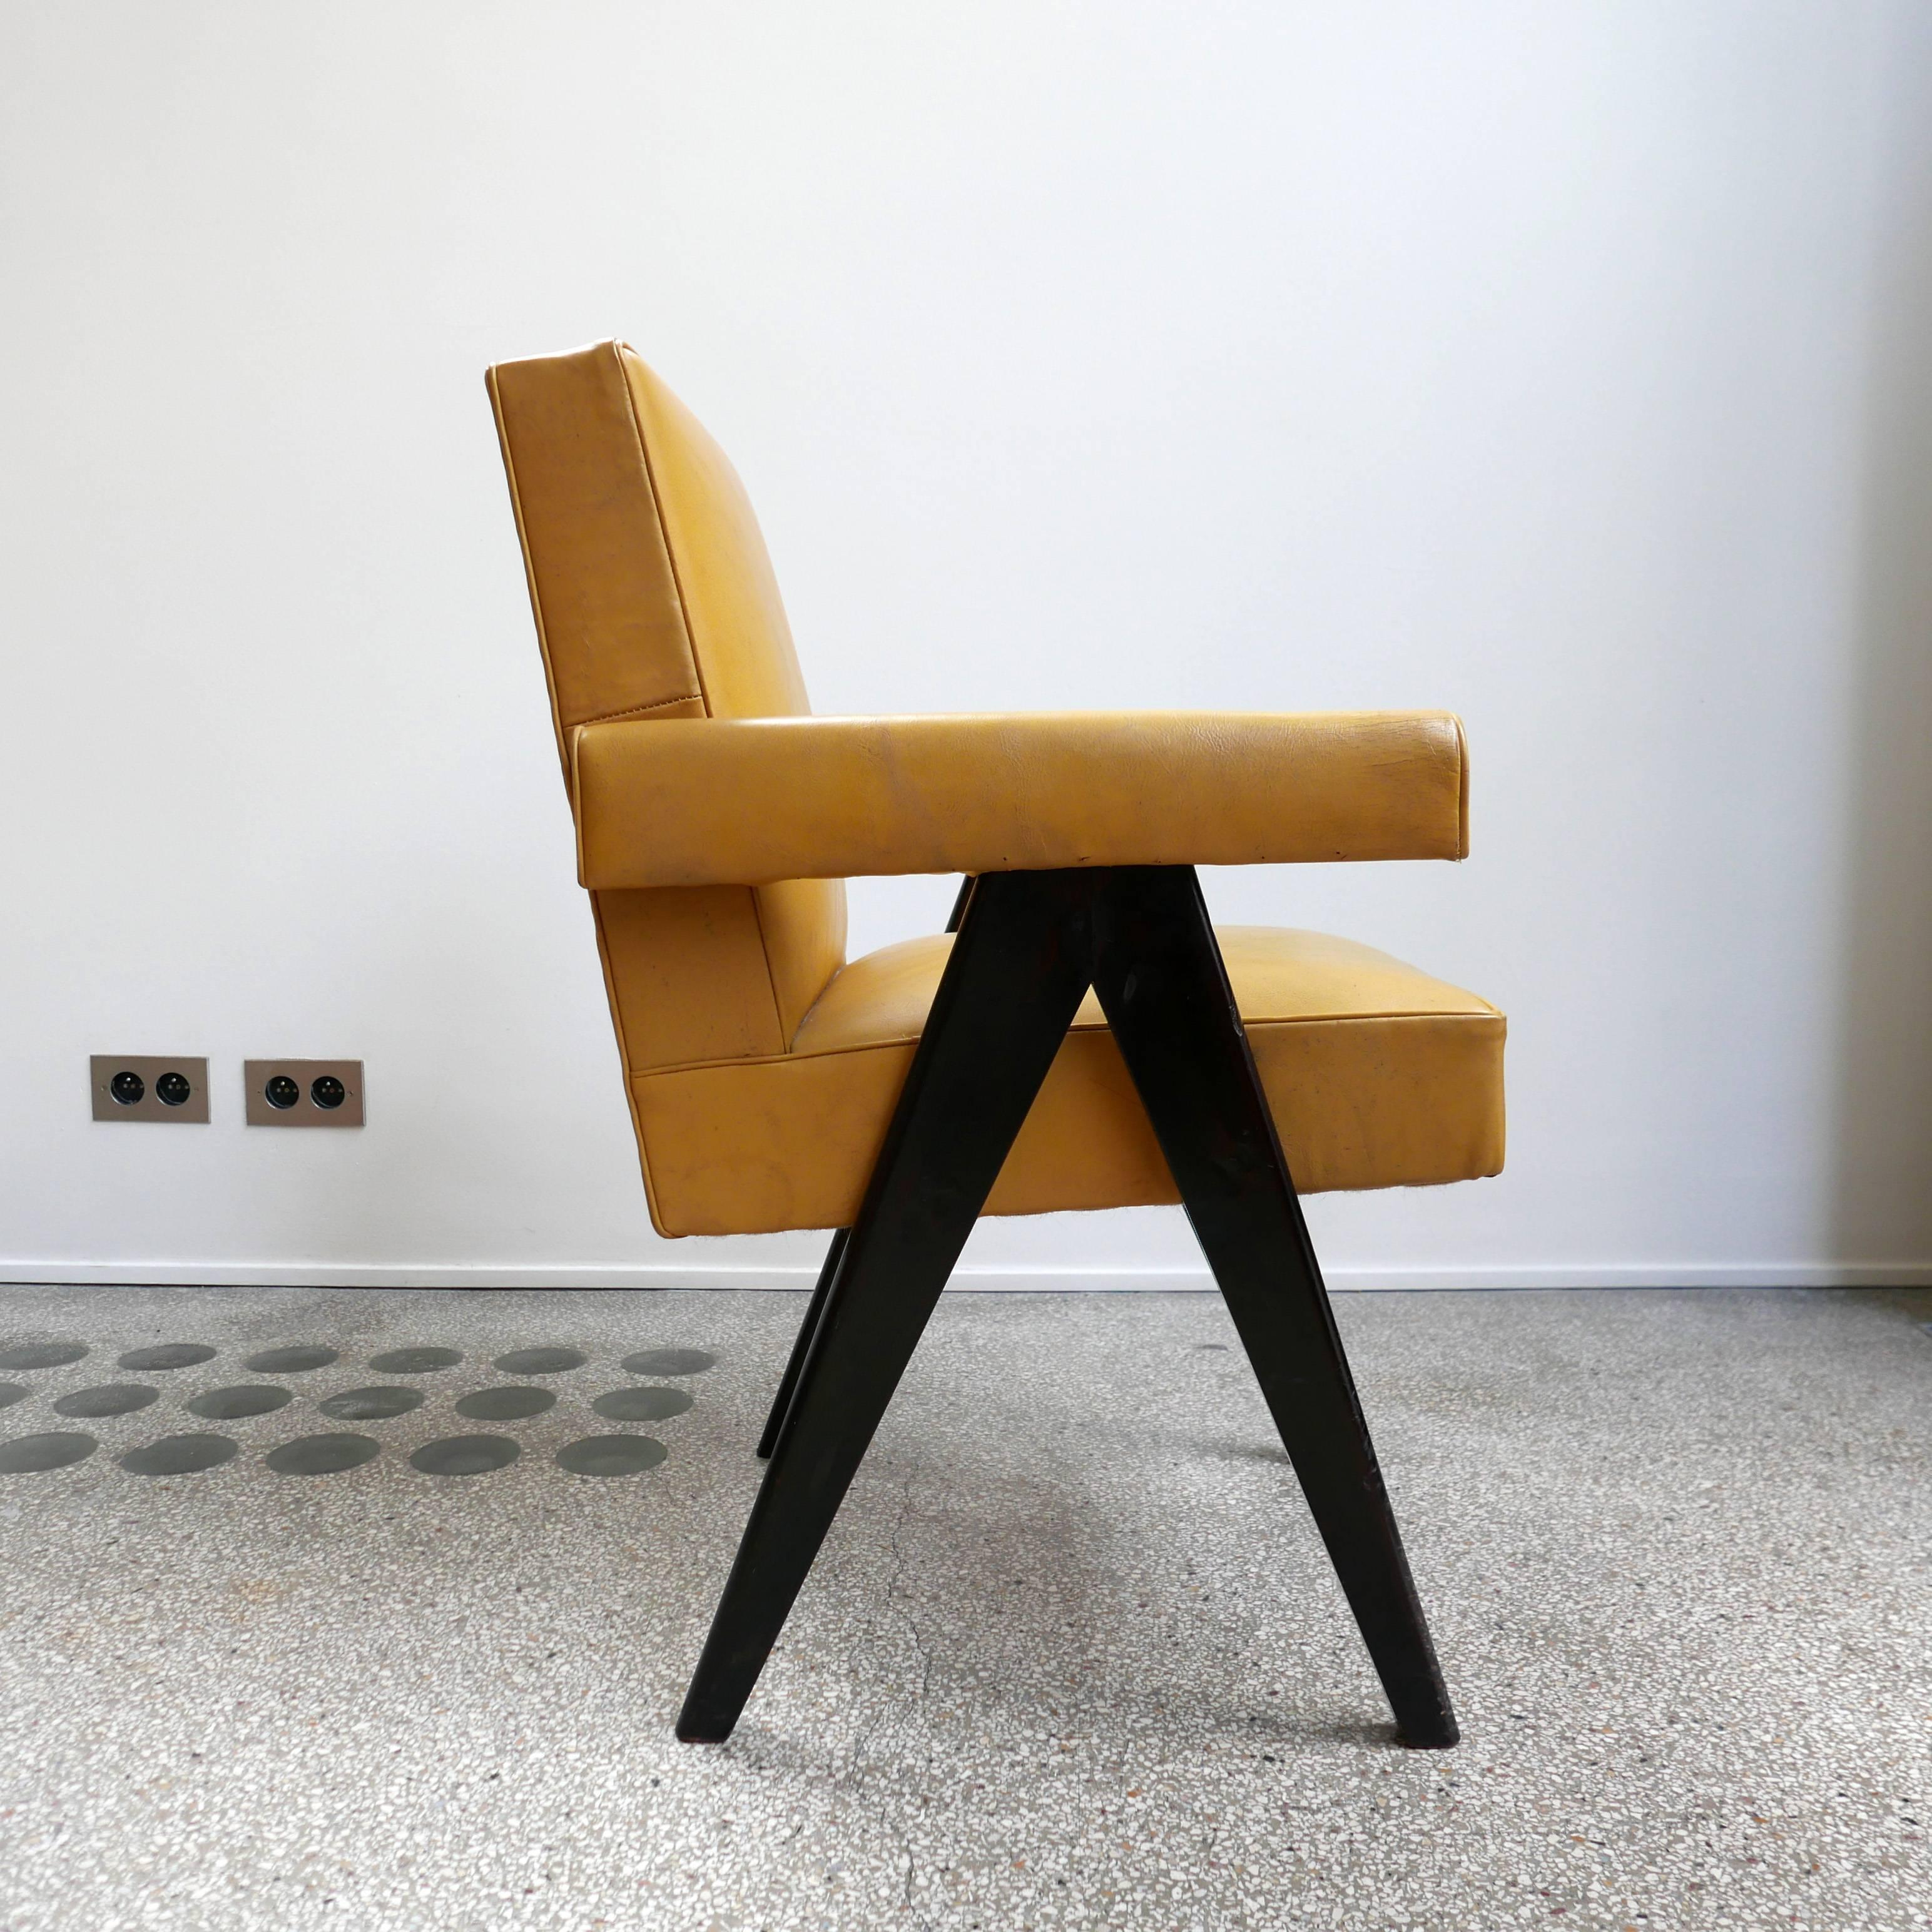 Pierre Jeanneret
PJ-SI-30-A 
Important : vintage collector's item for sale with guaranteed authenticity. 
Armchair called “Committe armchair”, circa 1953-1954
Solid teak wood, Yellow leather.

Bibliography:
Eric Touchaleaume & Gérald Moreau, “Le